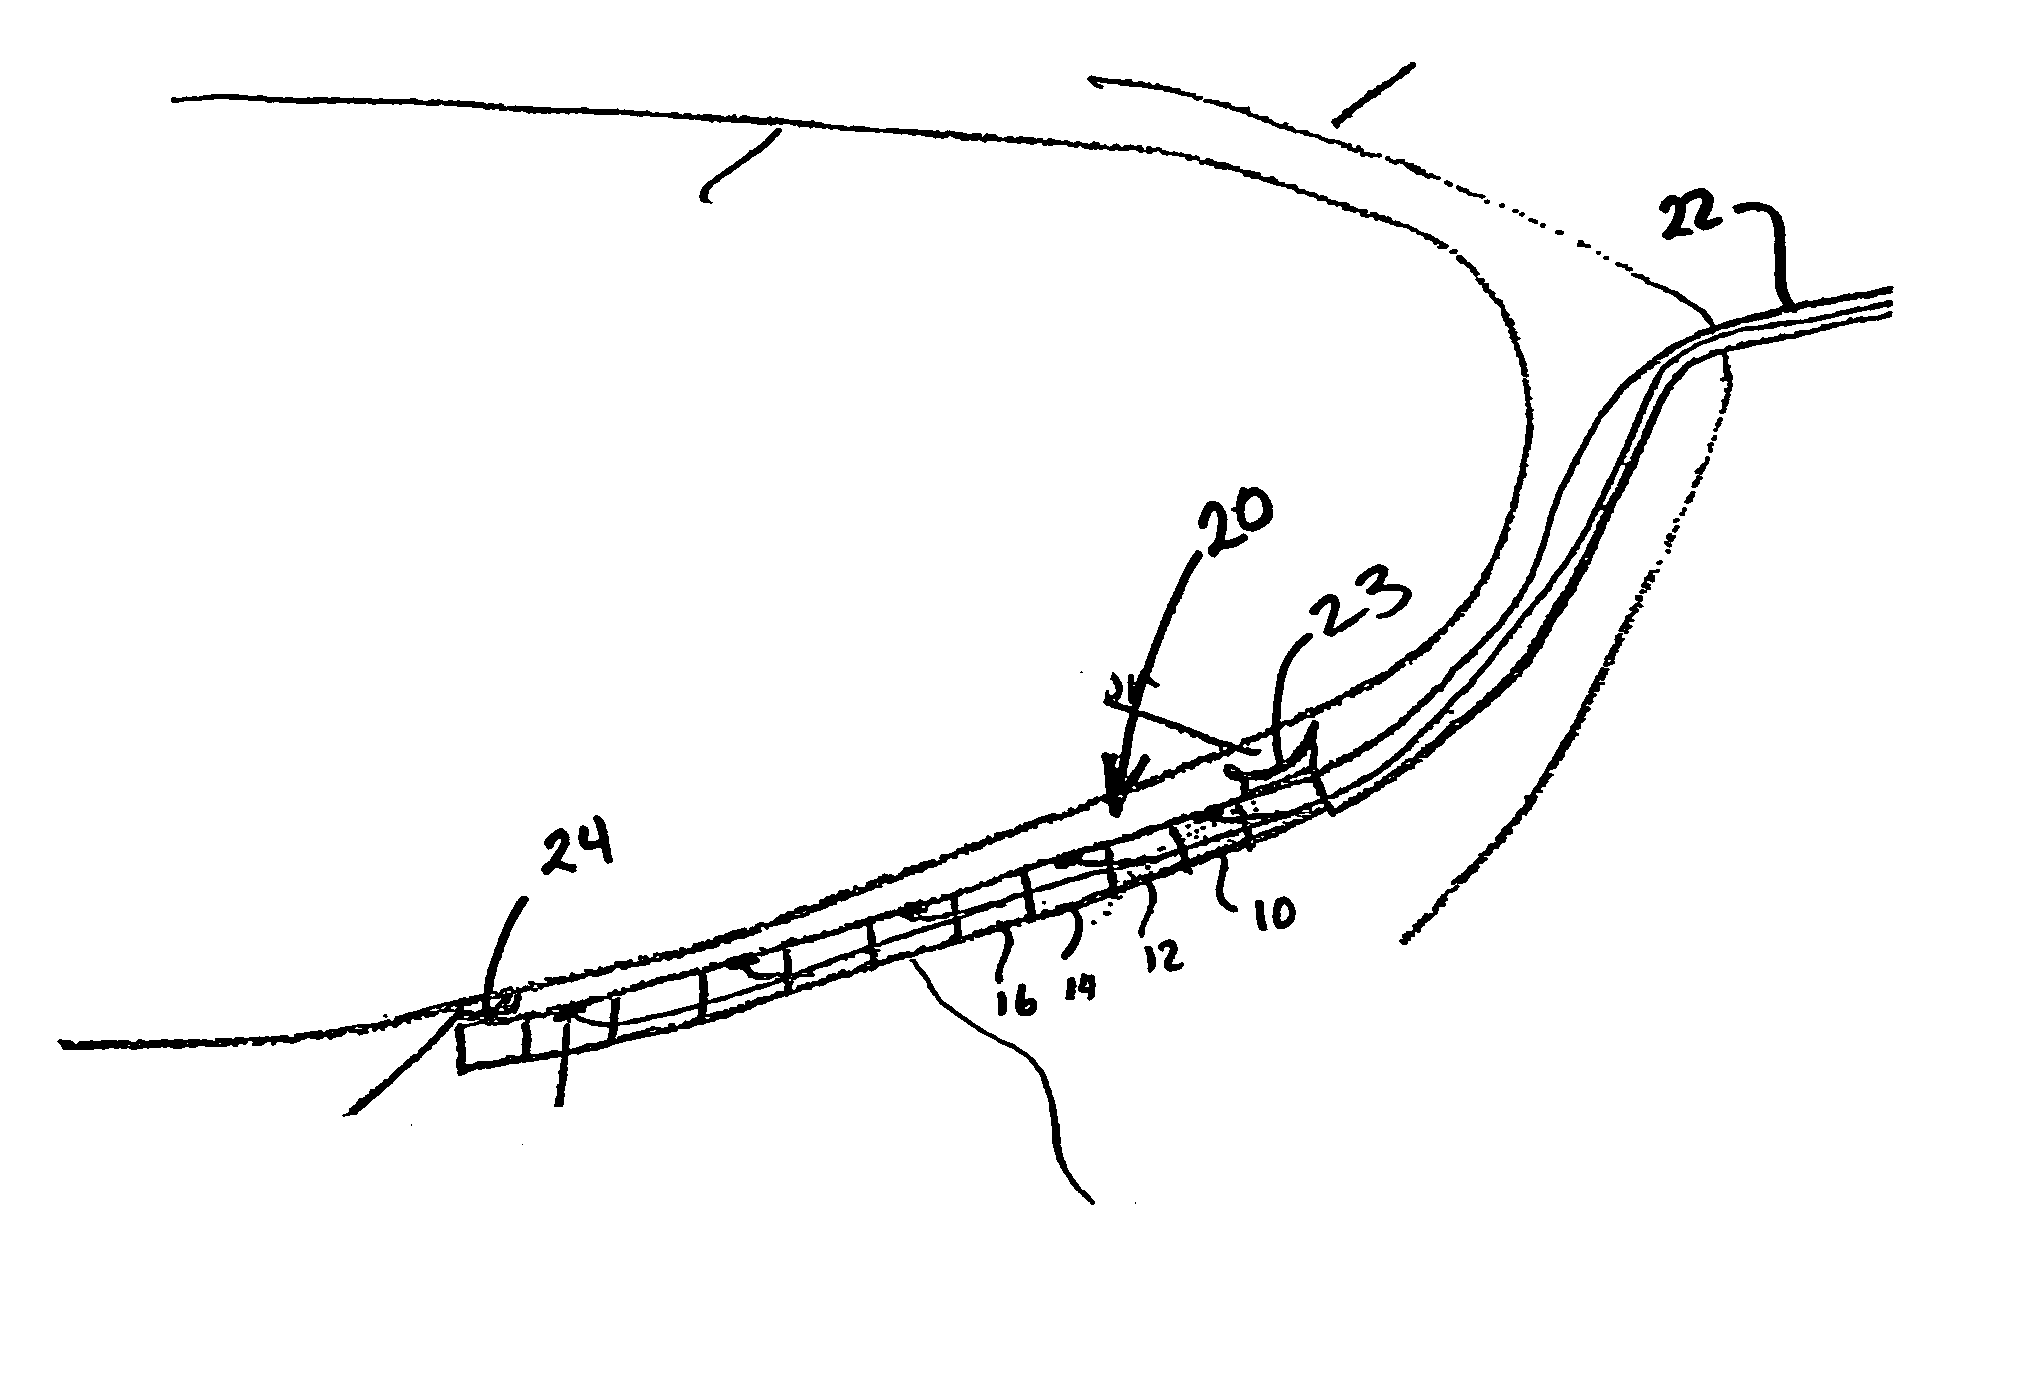 Perficardial pacing lead placement device and method